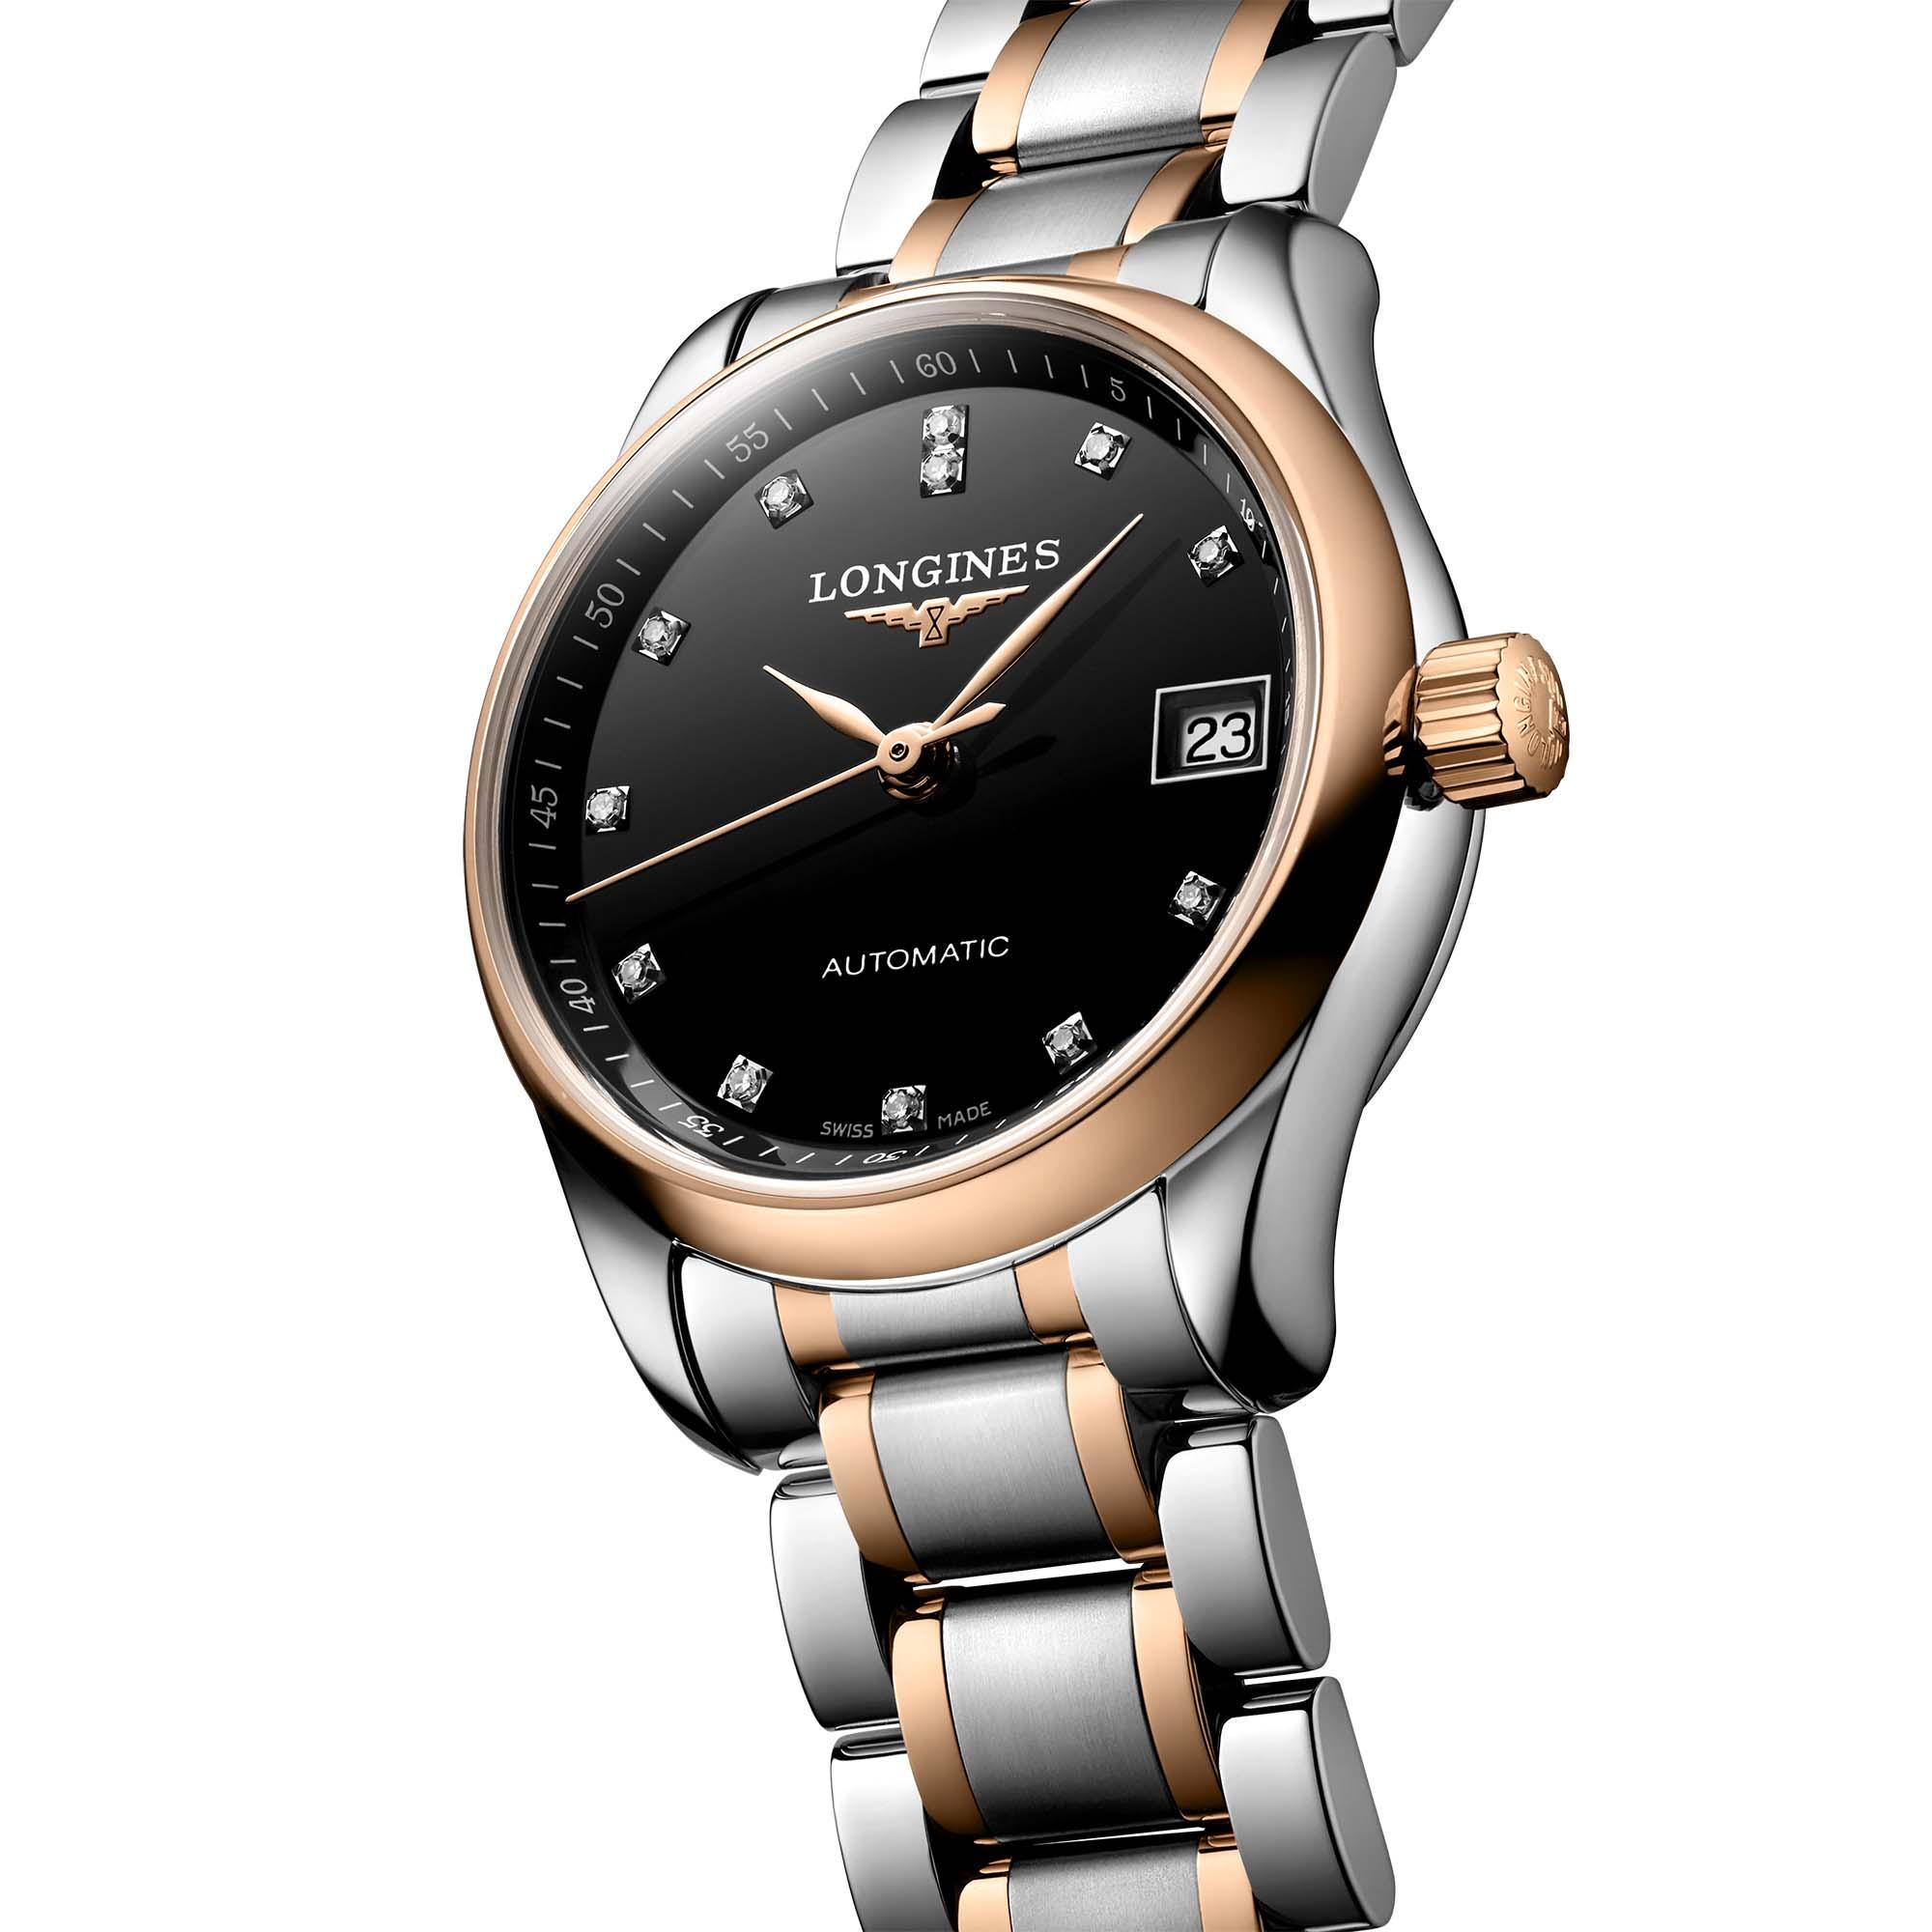 Longines The Longines Master Collection (Ref: L2.128.5.59.7)